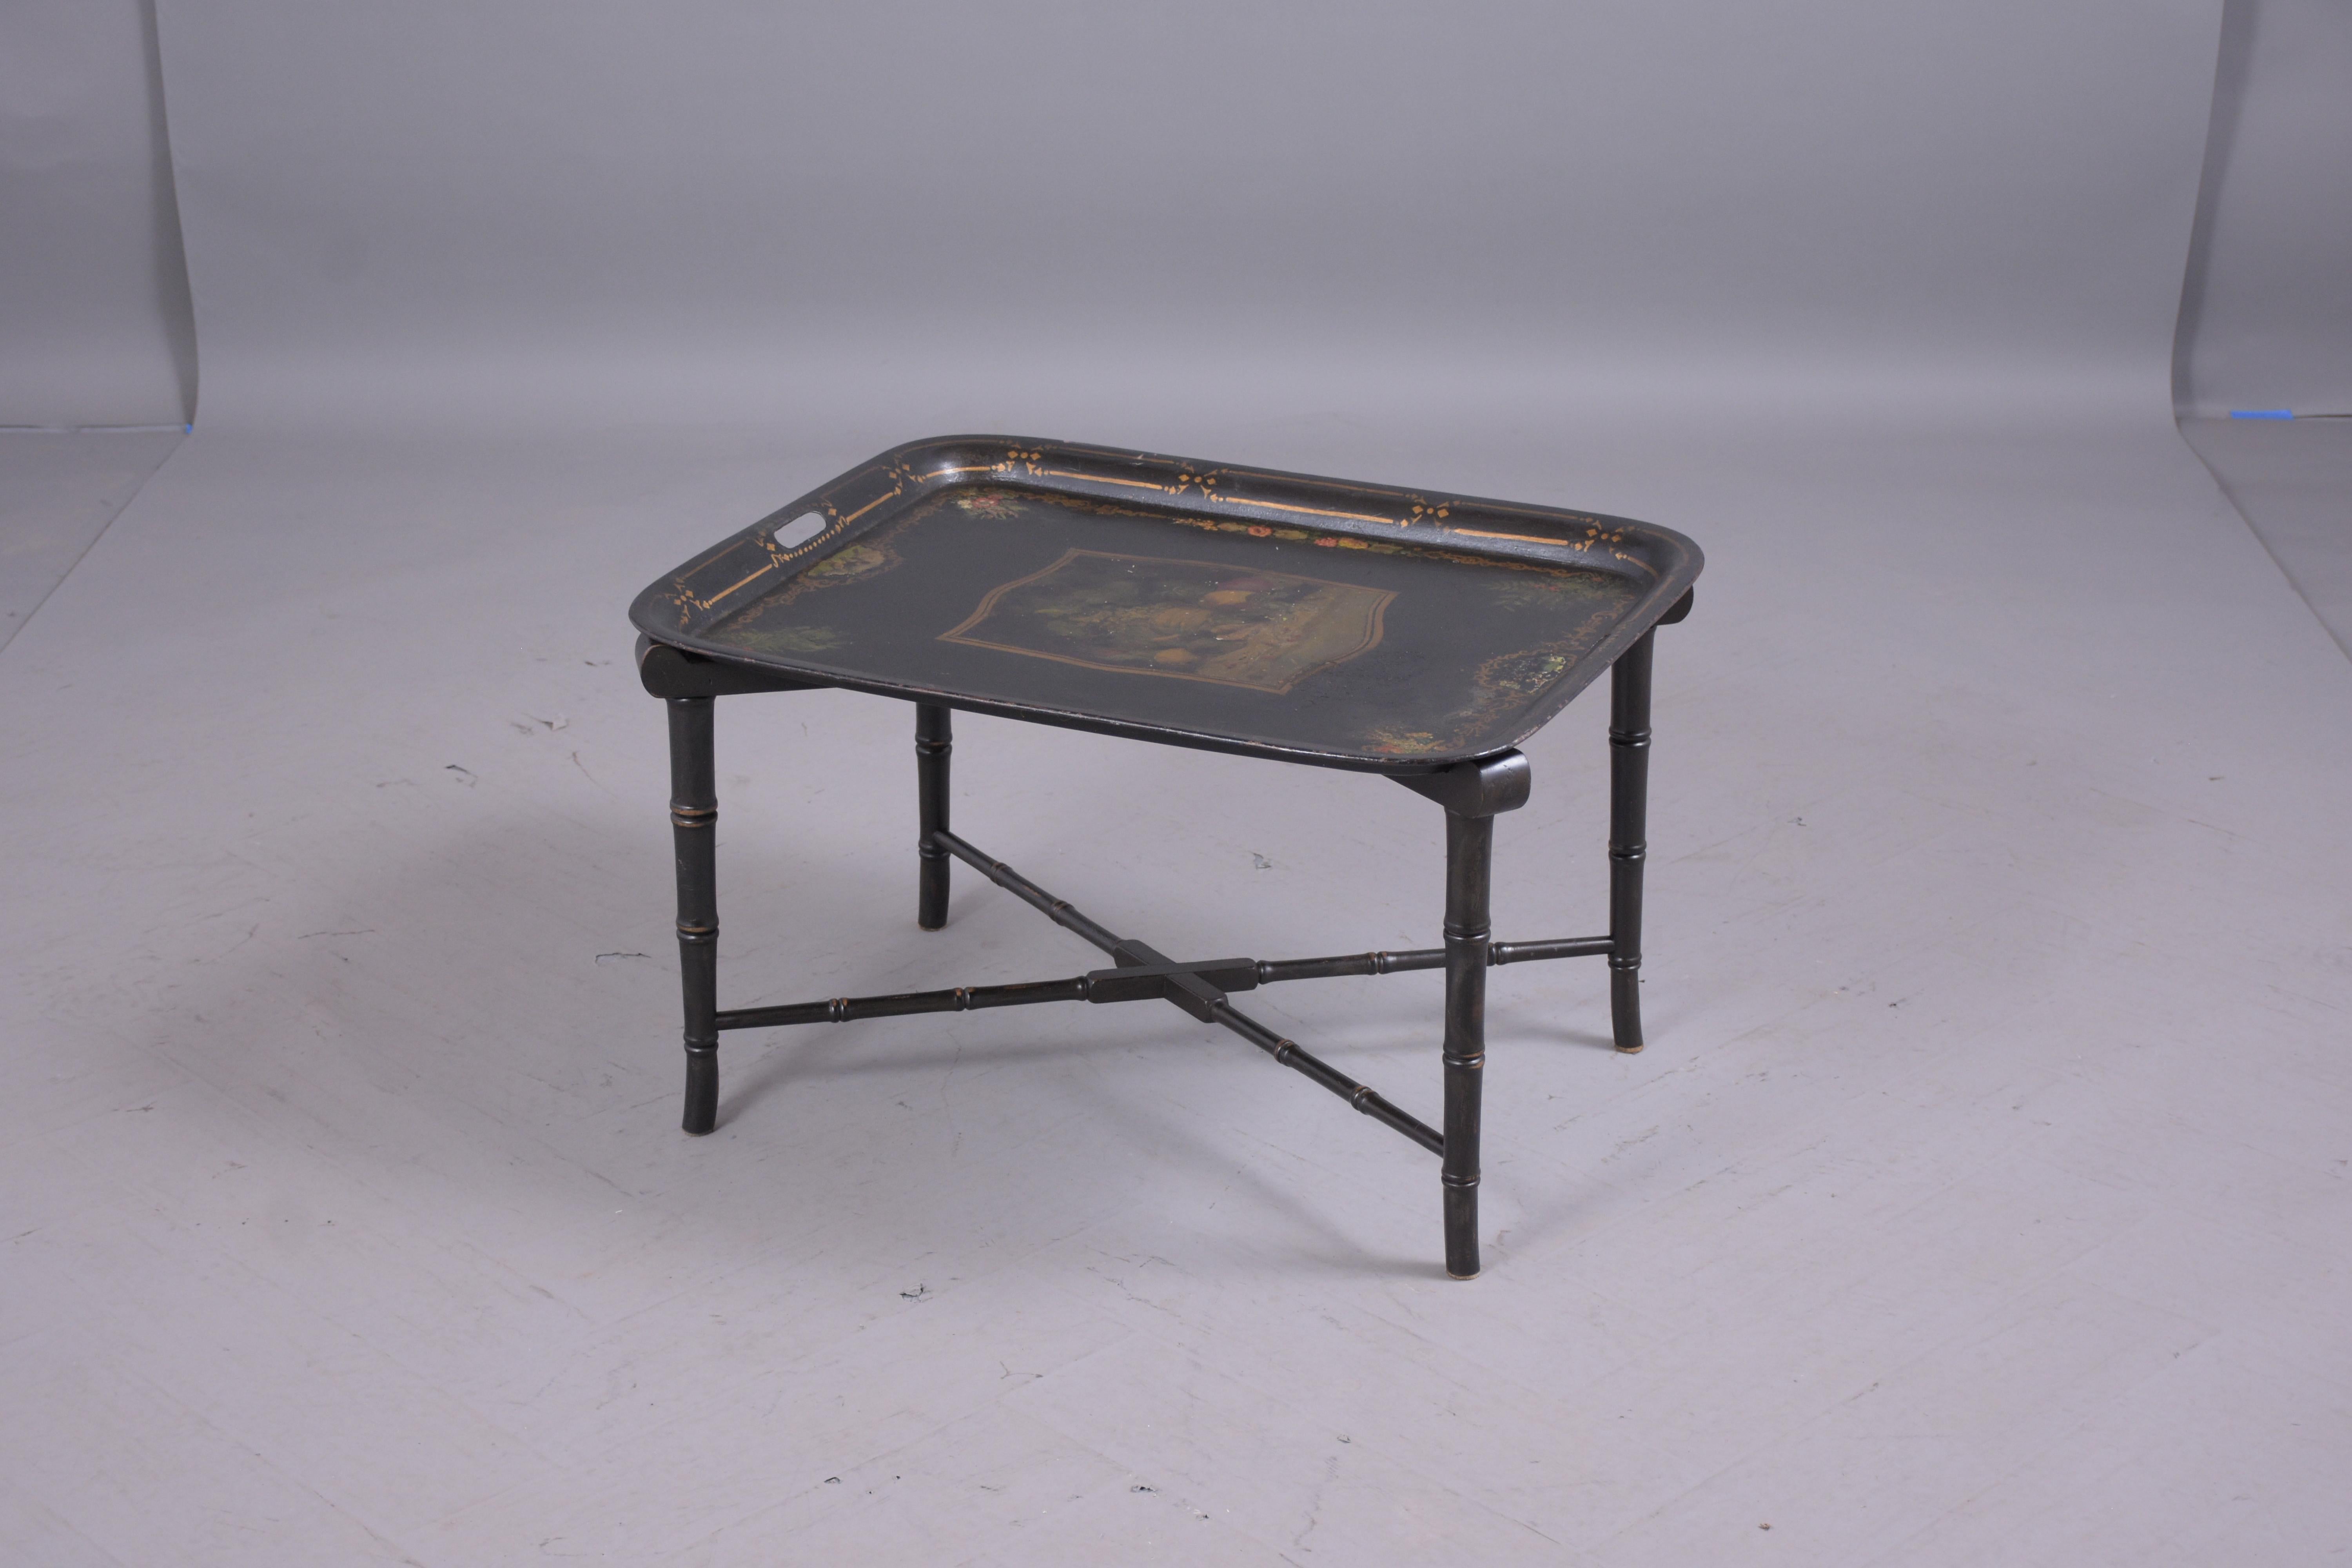 An extraordinary 1900s tole tray table, the top is crafted of metal, features trim details around the tray a fruit basket in the center. The top sits on a vintage wood base with faux bamboo design with its original ebonized finish, only cleaned and